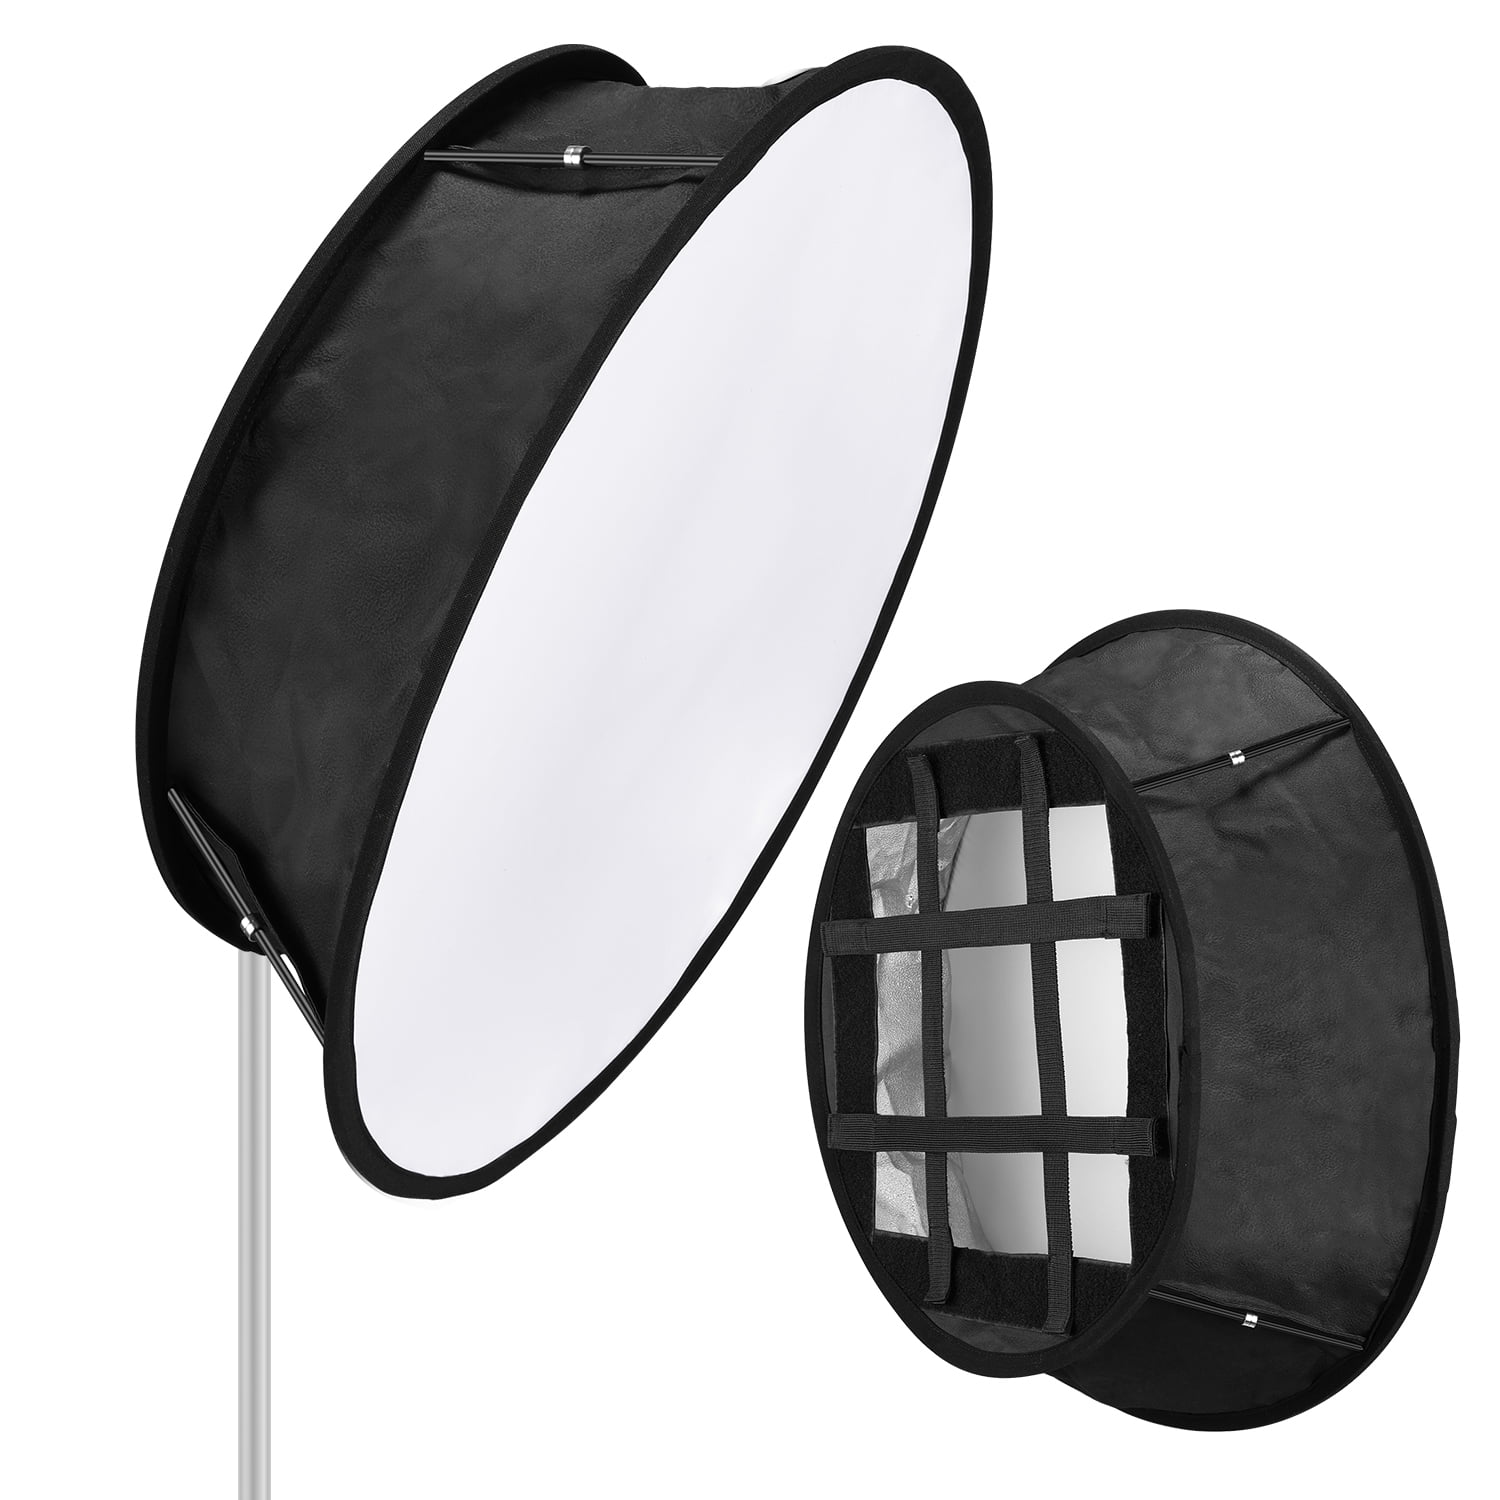 Black+Red Grid and Carrying Bag Compatible with Neewer 480/660/530 LED Light Panels Neewer Collapsible Softbox with Strap Attachment 9.25x8.27 inches Opening